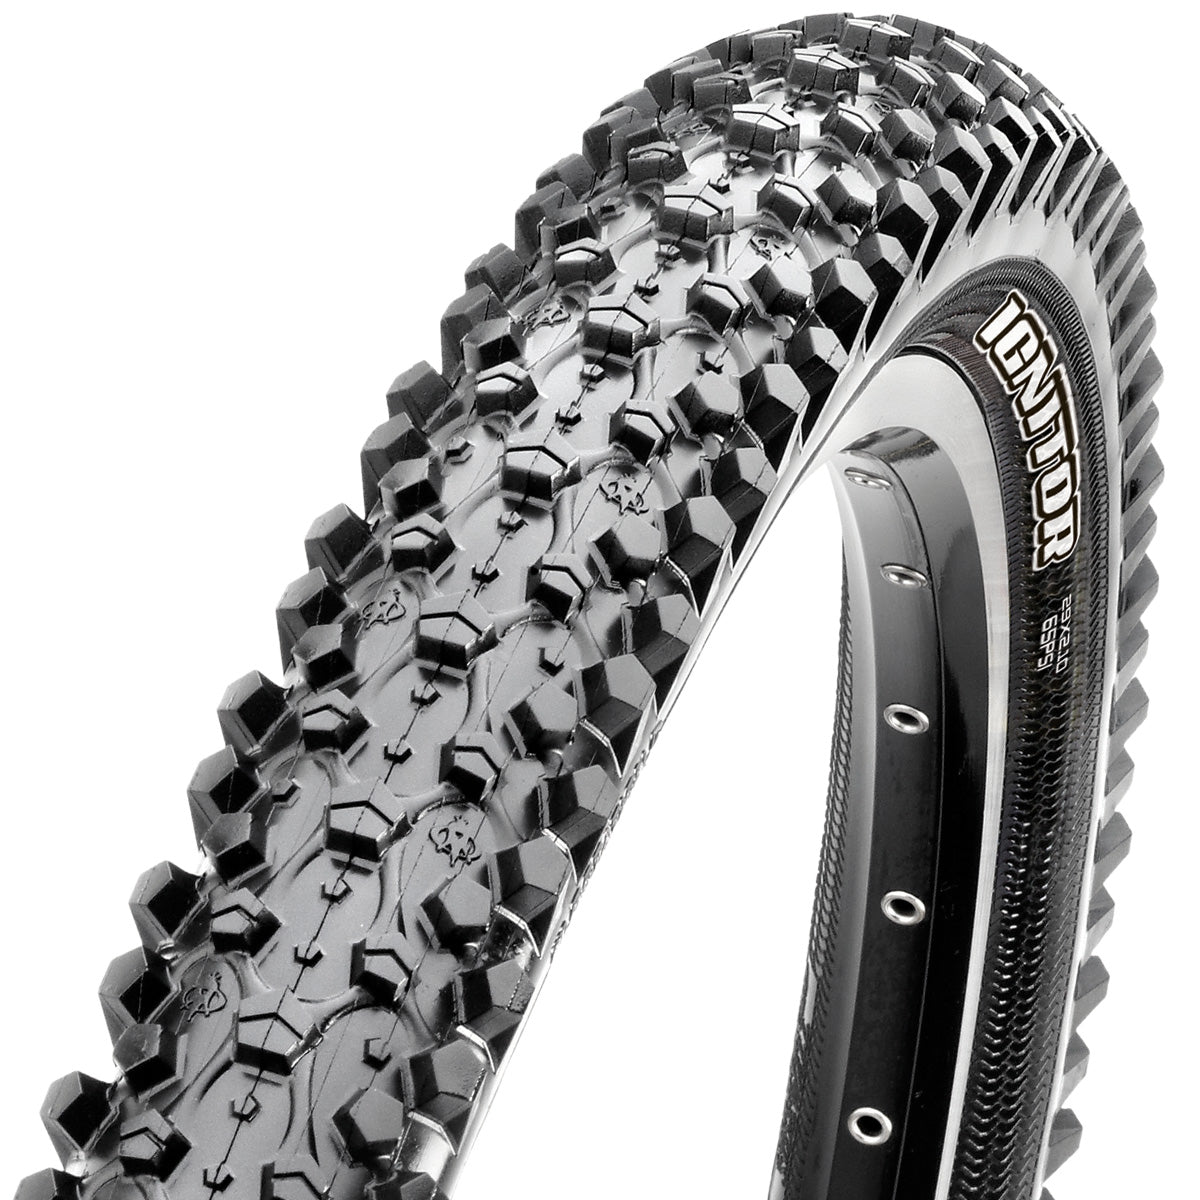 Maxxis Ignitor 29er MTB Tyre